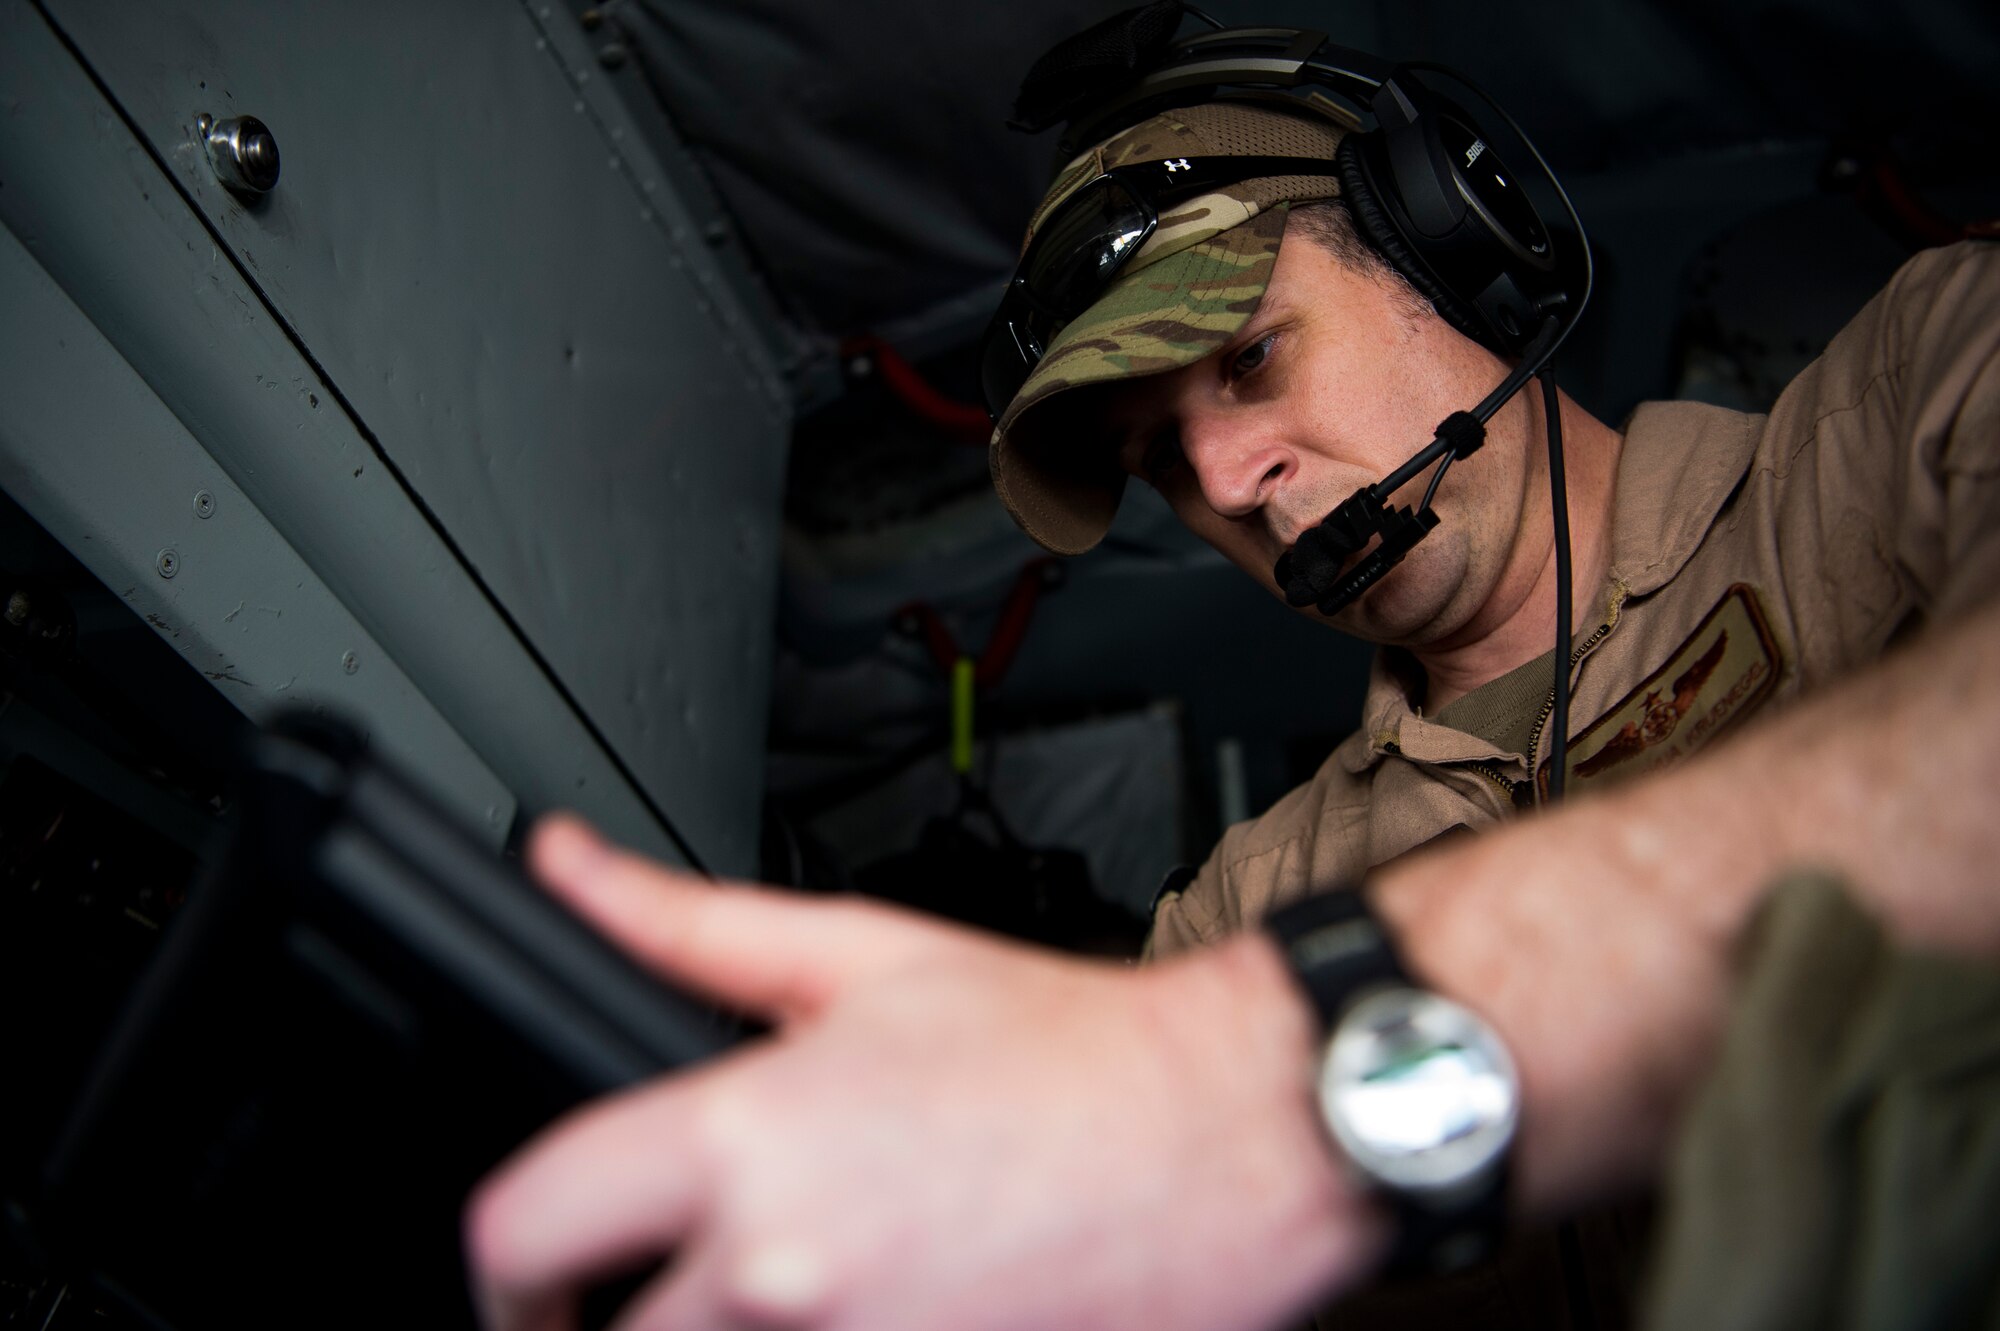 A U.S. Air Force in-flight refueling specialist assigned to the 28th Expeditionary Air Refueling Squadron performs a preflight inspection on a KC-135 Stratotanker at Al Udeid Air Base, Qatar, Jan. 14, 2020.